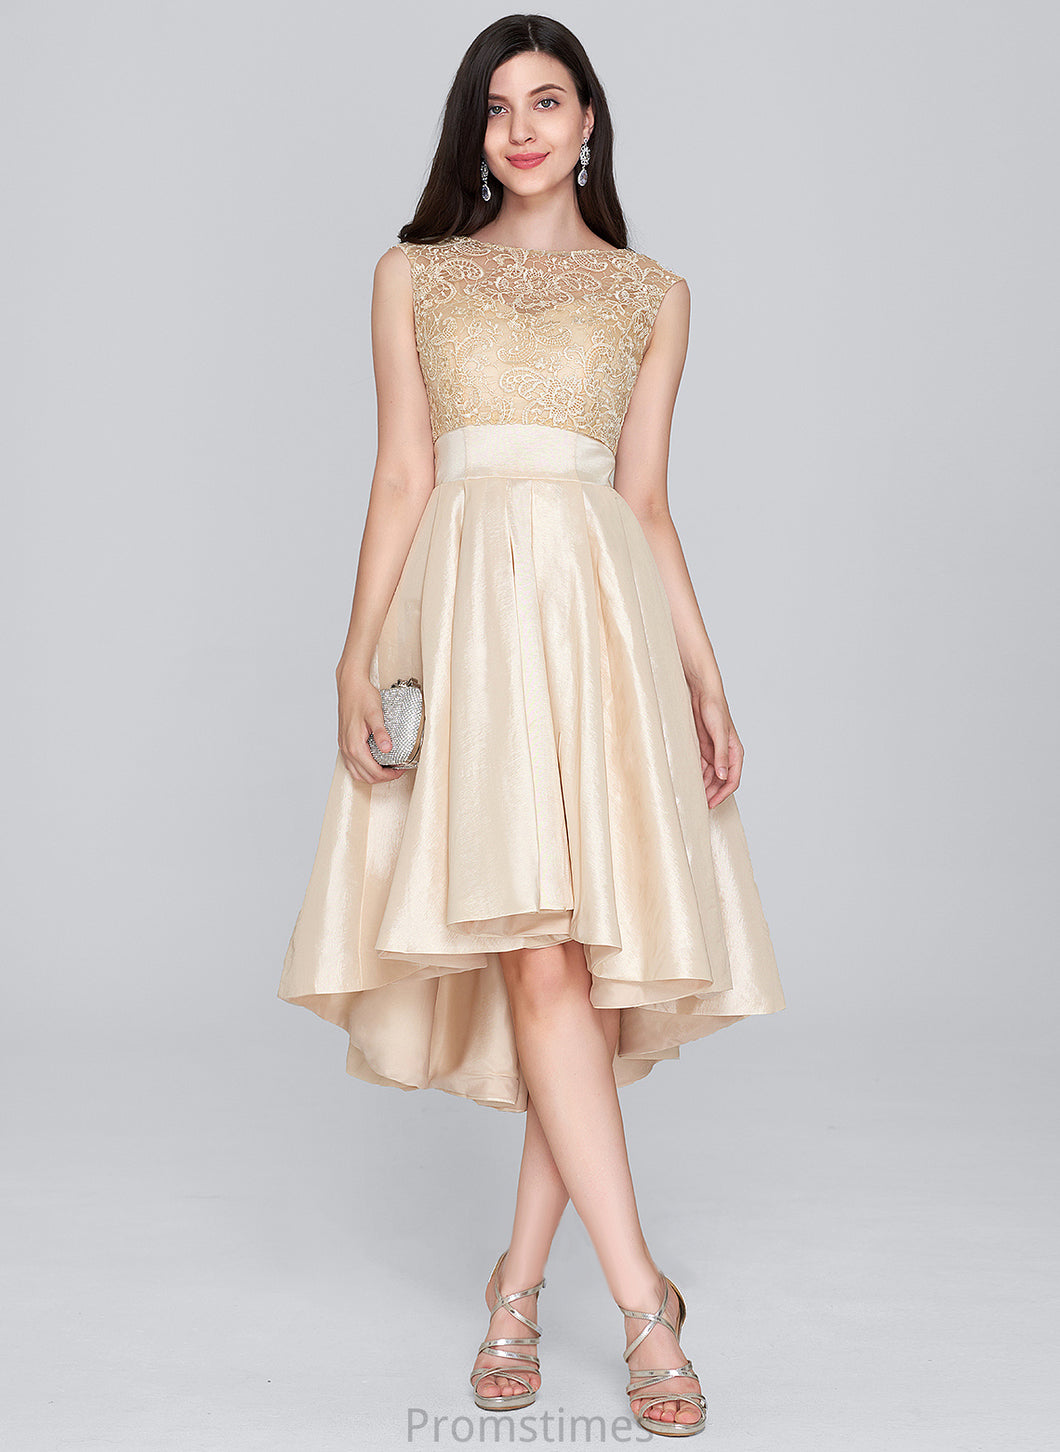 Scoop A-Line With Homecoming Taffeta Dress Lace Asymmetrical Homecoming Dresses Neck Carissa